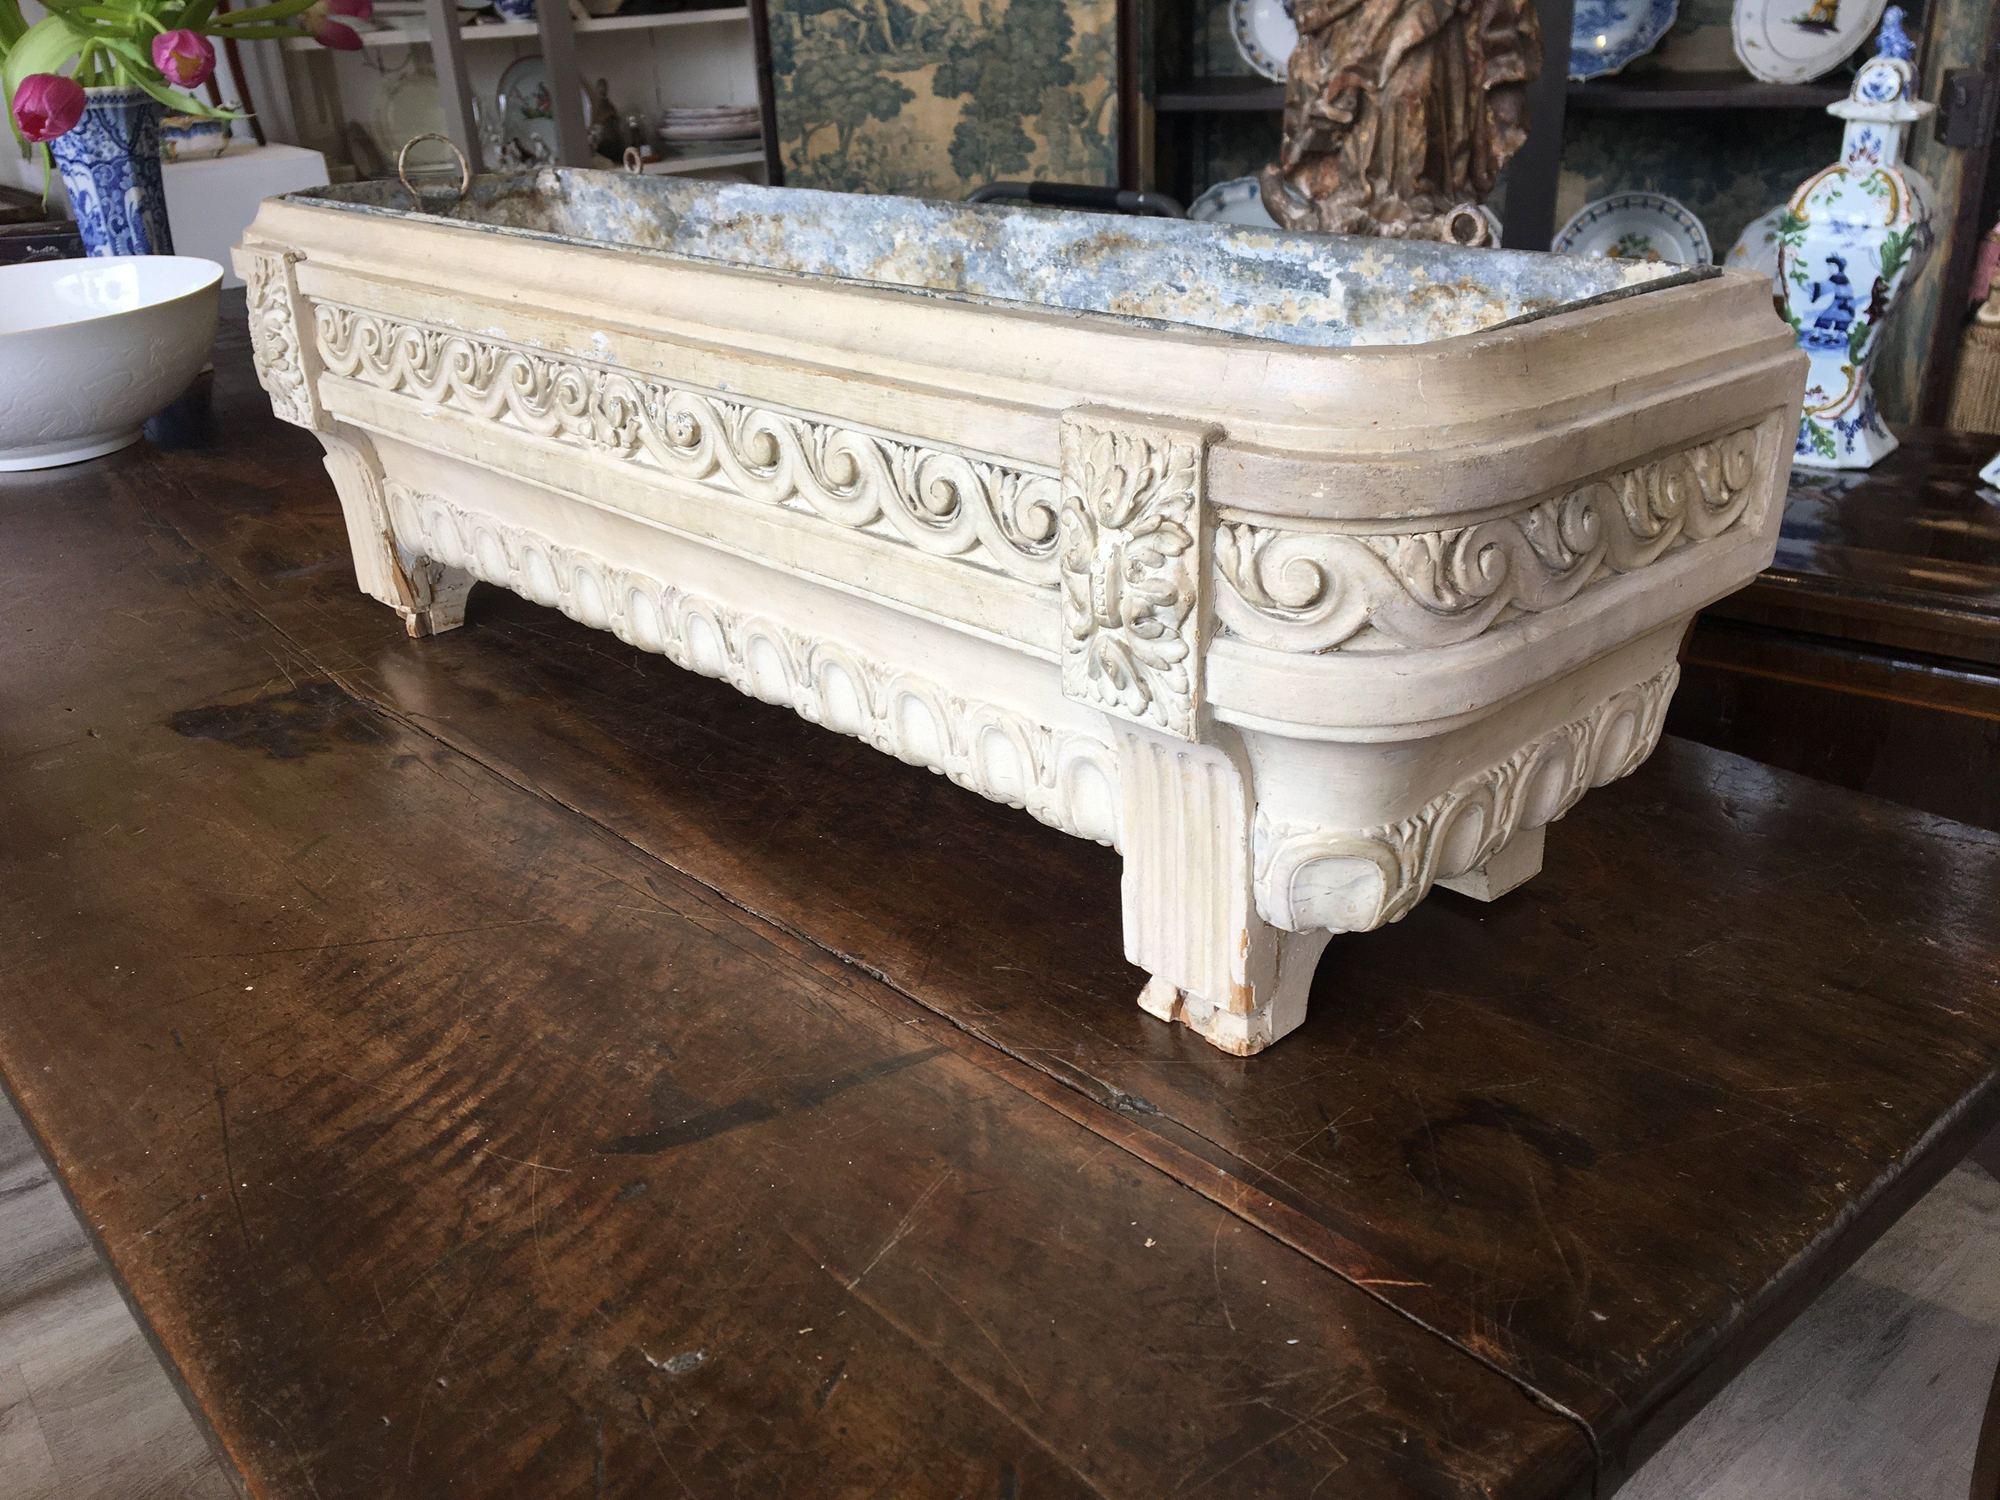 19th century French Provincial white painted, carved, jardinière with original zinc liner.